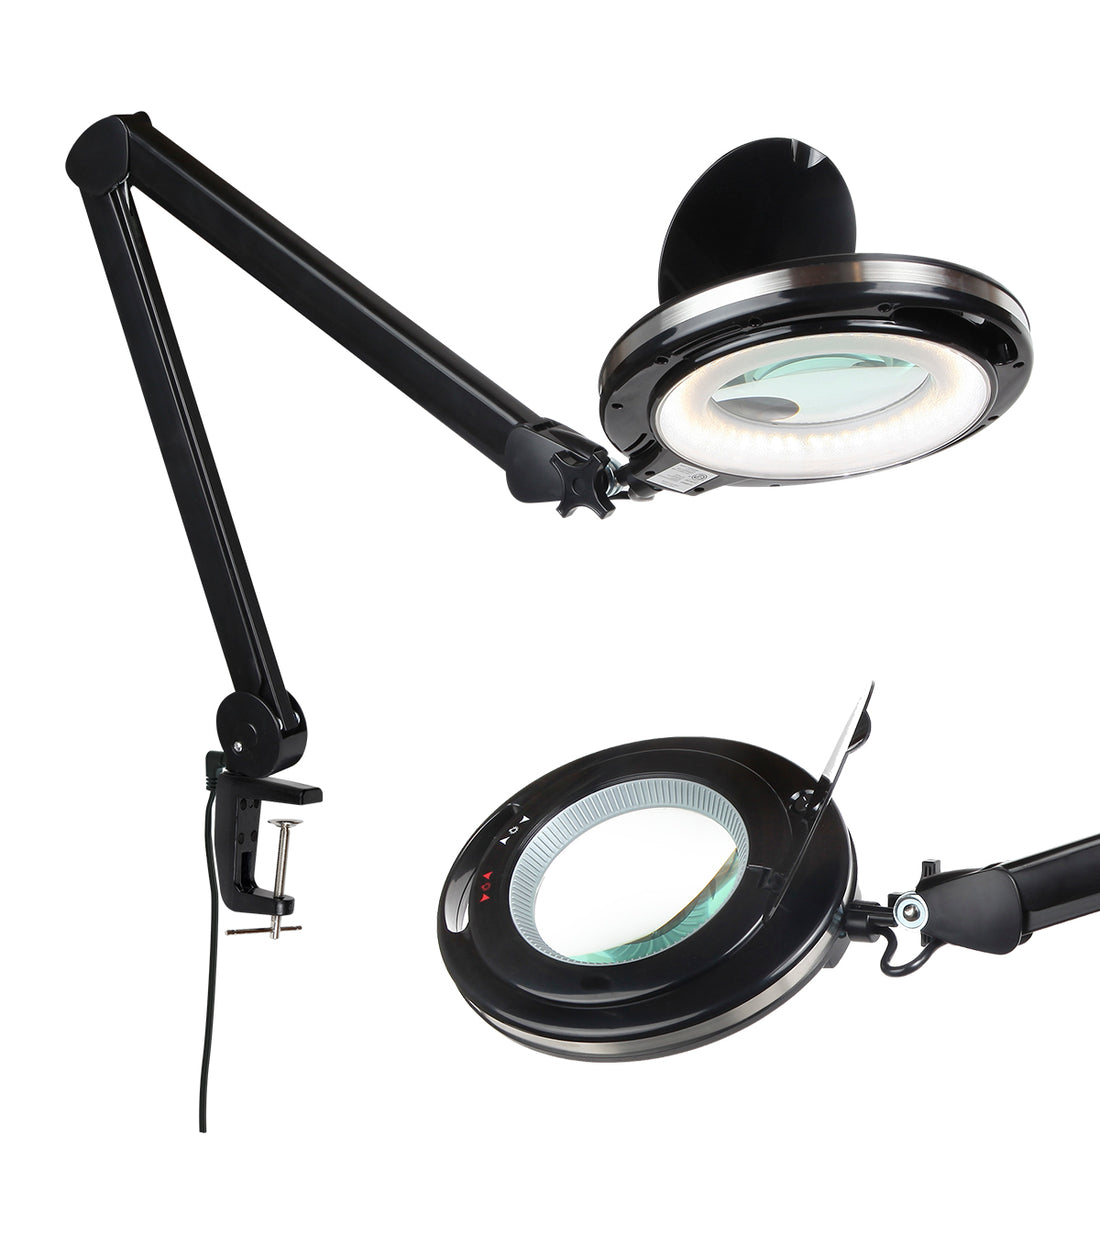 Brightech LightView PRO - LED Magnifying Glass Desk Lamp for Close Work - Bright, Lighted Magnifier for Reading, Crafts & Pro Tasks - Light Color Adjustable & Dimmable - 1.75x Magnification